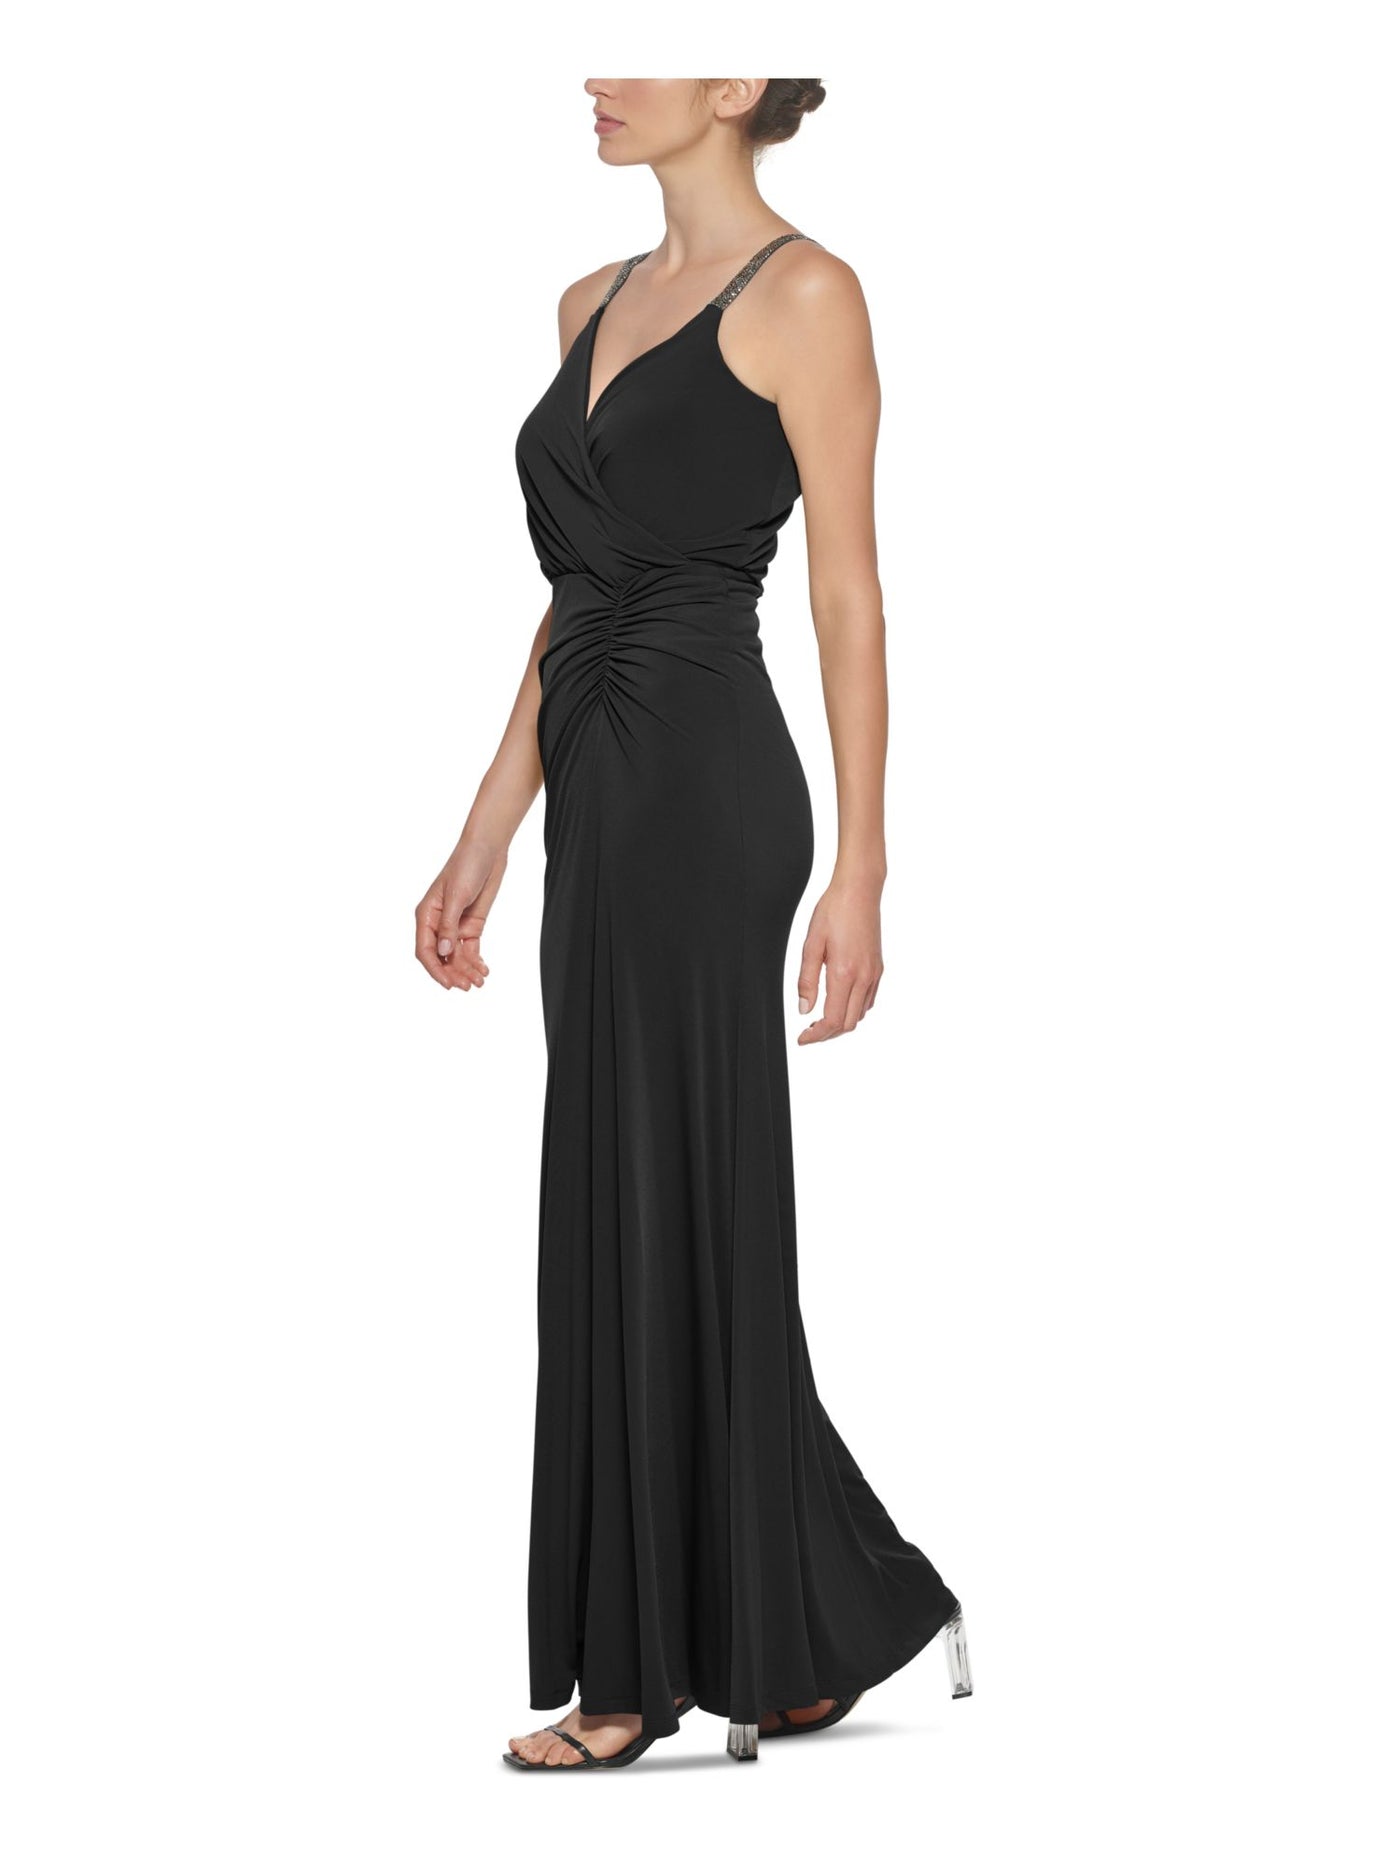 CALVIN KLEIN Womens Black Stretch Ruched Zippered Embellished Straps Jersey-knit Sleeveless Surplice Neckline Full-Length Formal Gown Dress 2